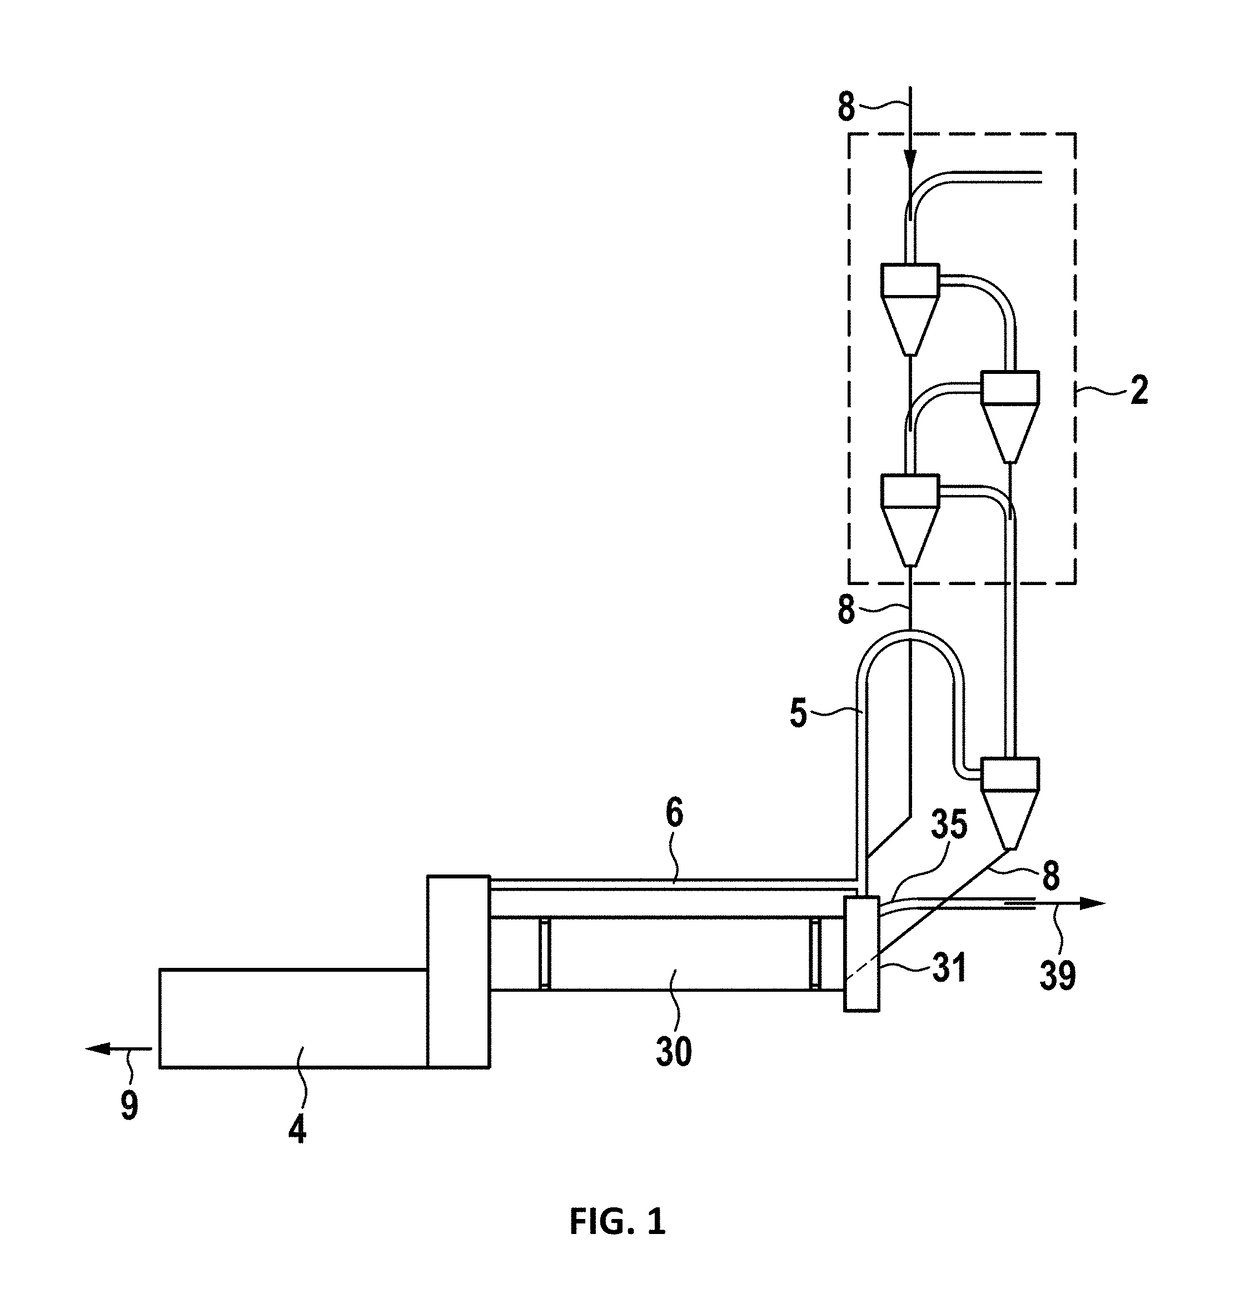 Method and Apparatus for Producing Cement Clinker